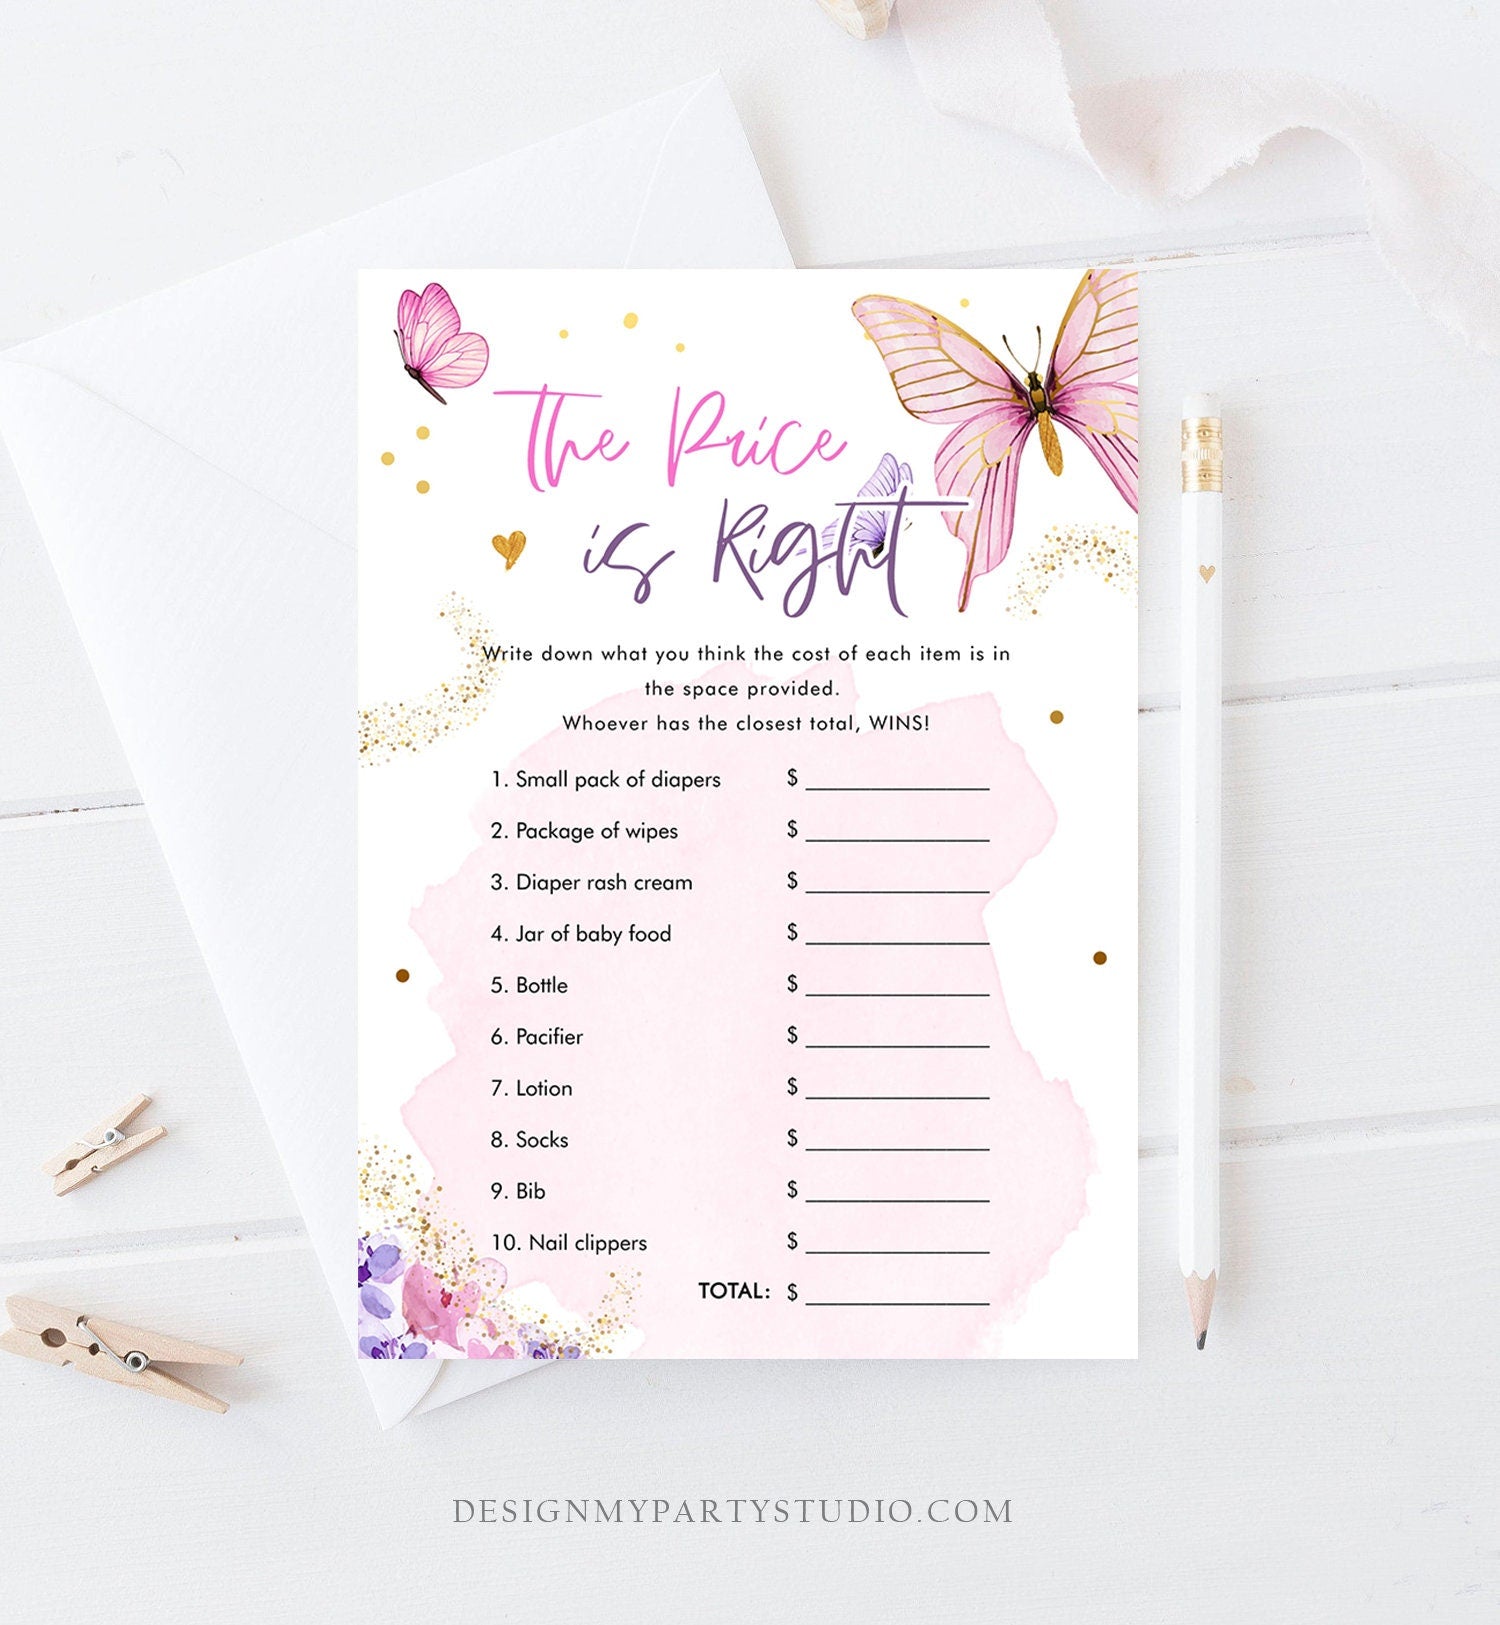 Editable The Price is Right Baby Shower Game Butterfly Baby Books Floral Butterflies Pink Purple Activity Corjl Template Printable 0437